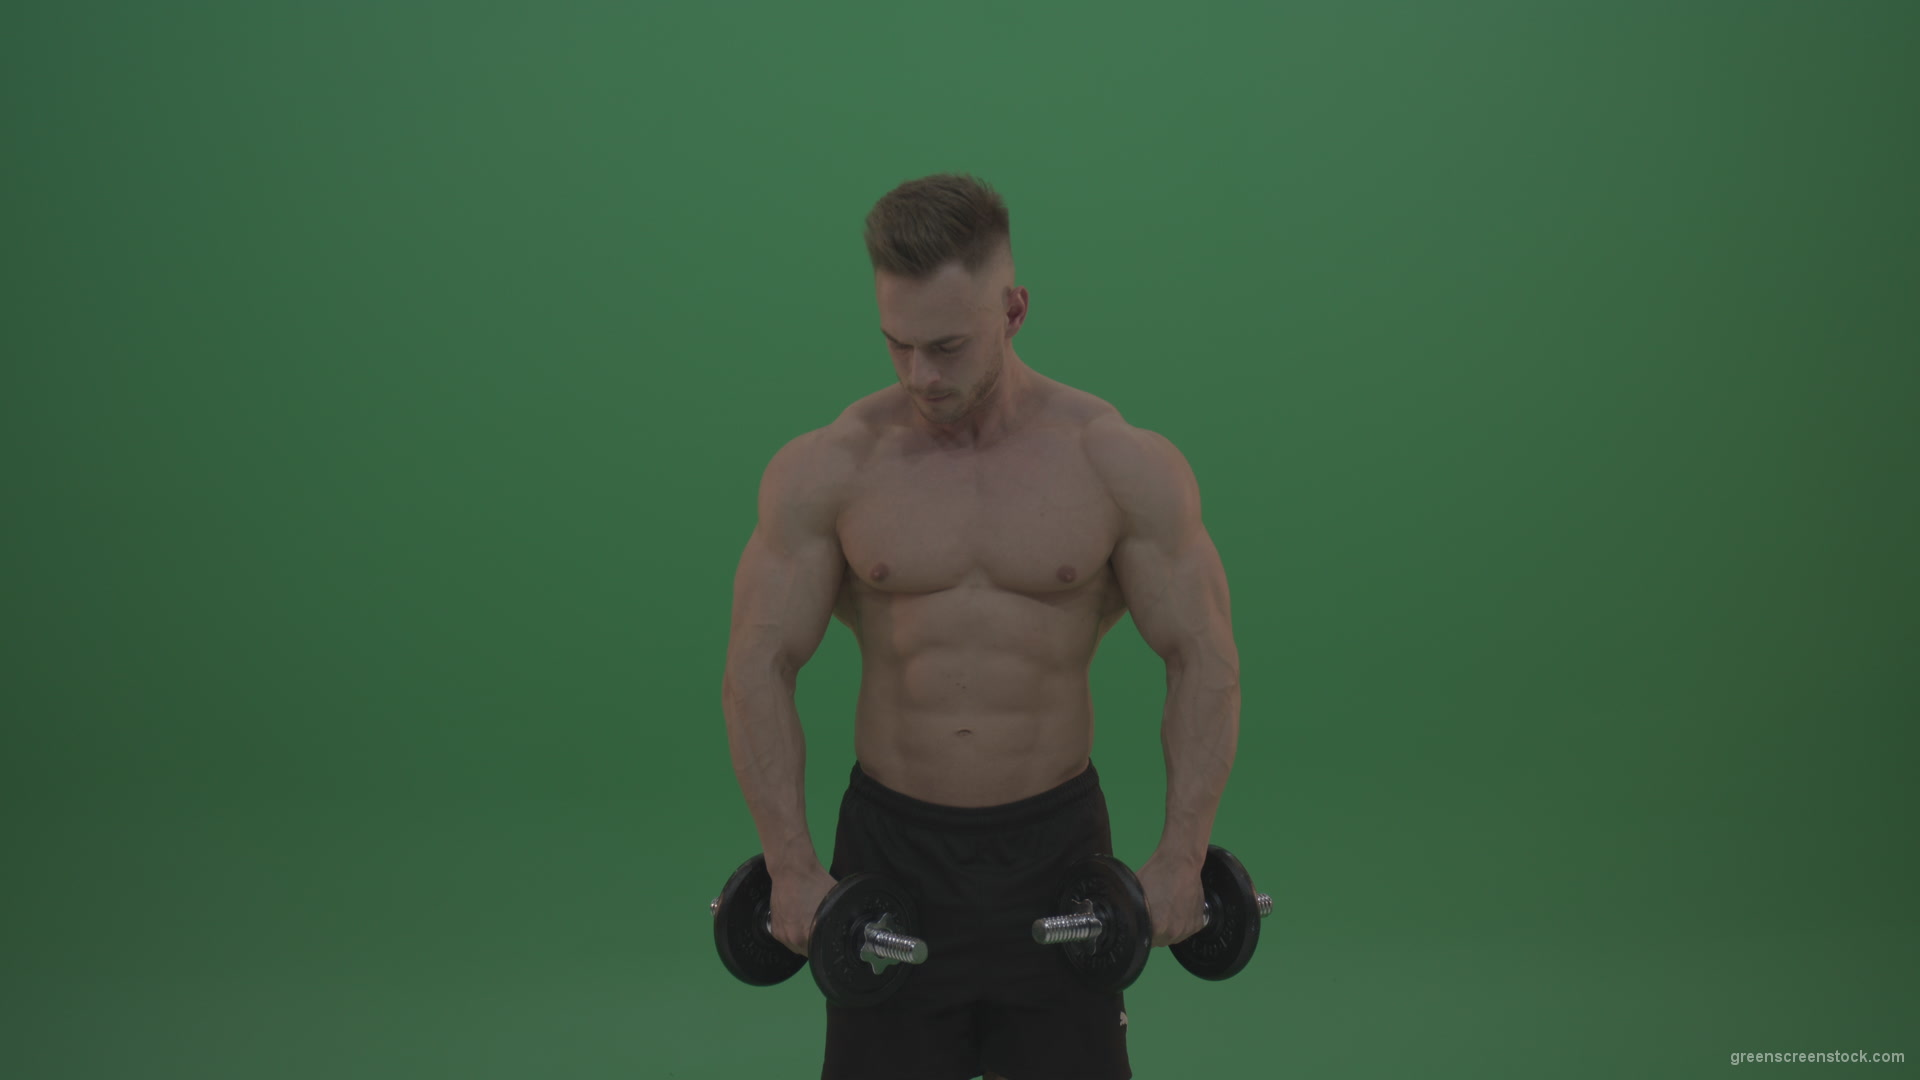 Young_Bodybuilder_Working_Out_With_Two_Handed_Dumbbell_Biceps_Exercises_On_Green_Screen_Wall_Background_008 Green Screen Stock